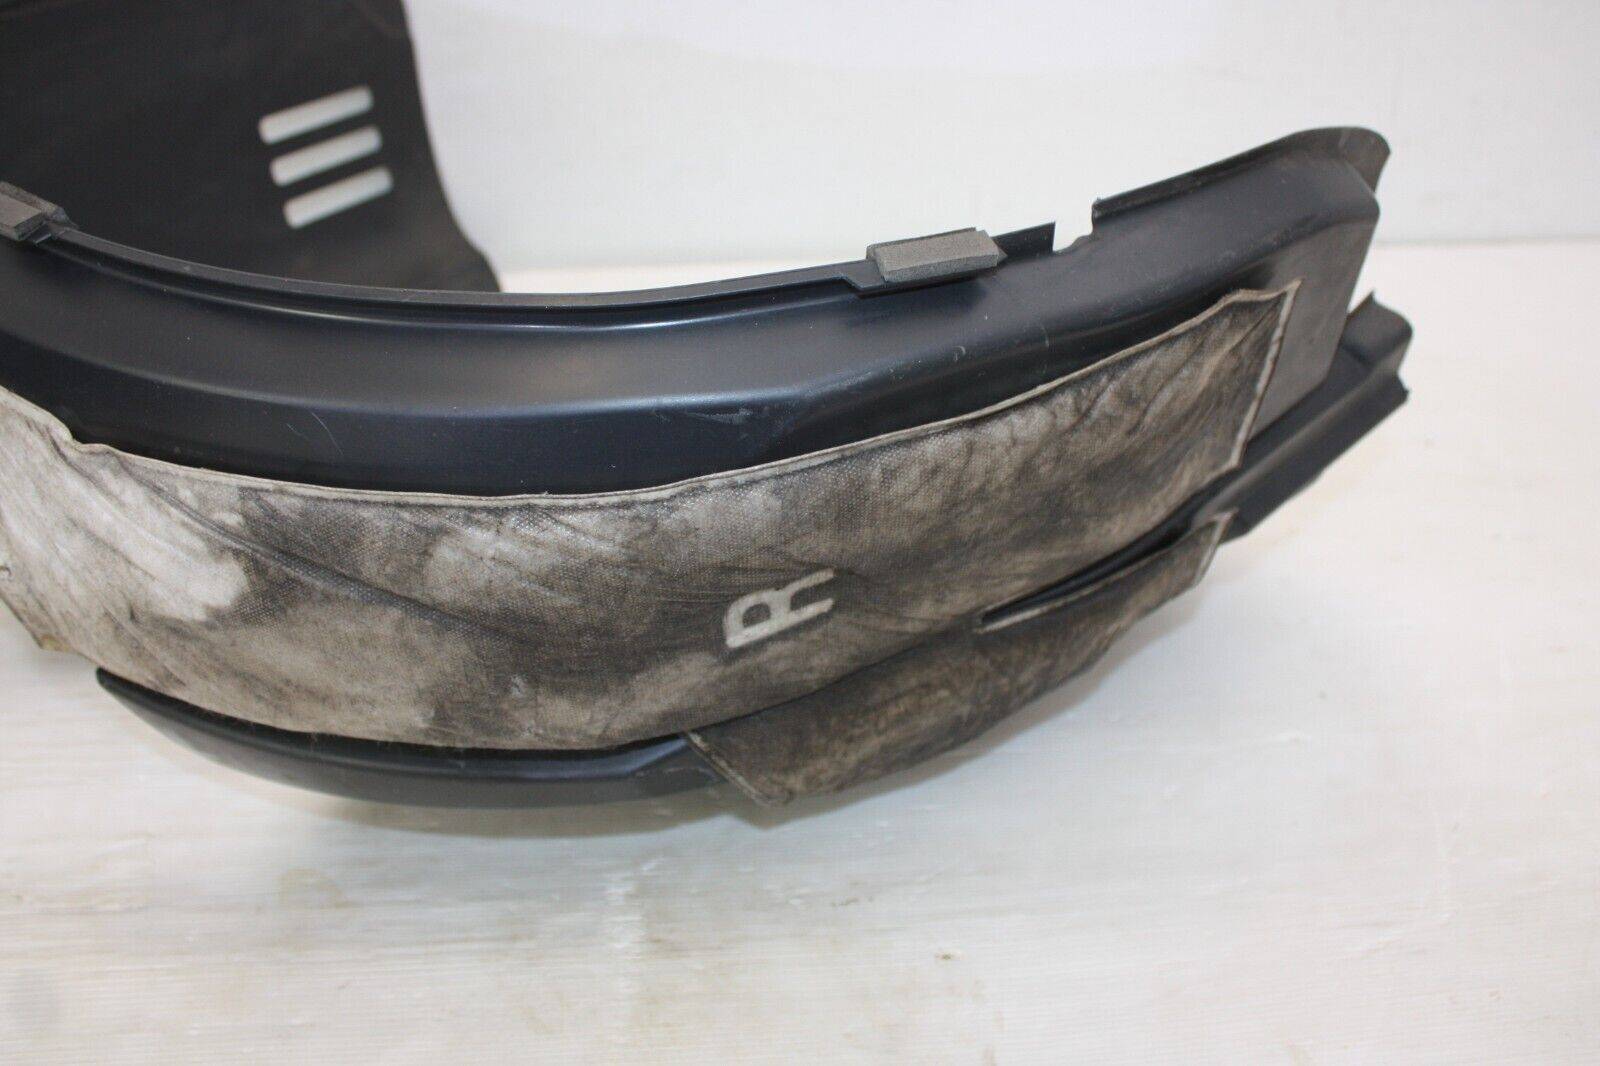 Ford-Fiesta-Front-Right-Side-Wheel-Liner-Splash-Guard-2008-to-2012-8A61-16114-B-175656992480-8